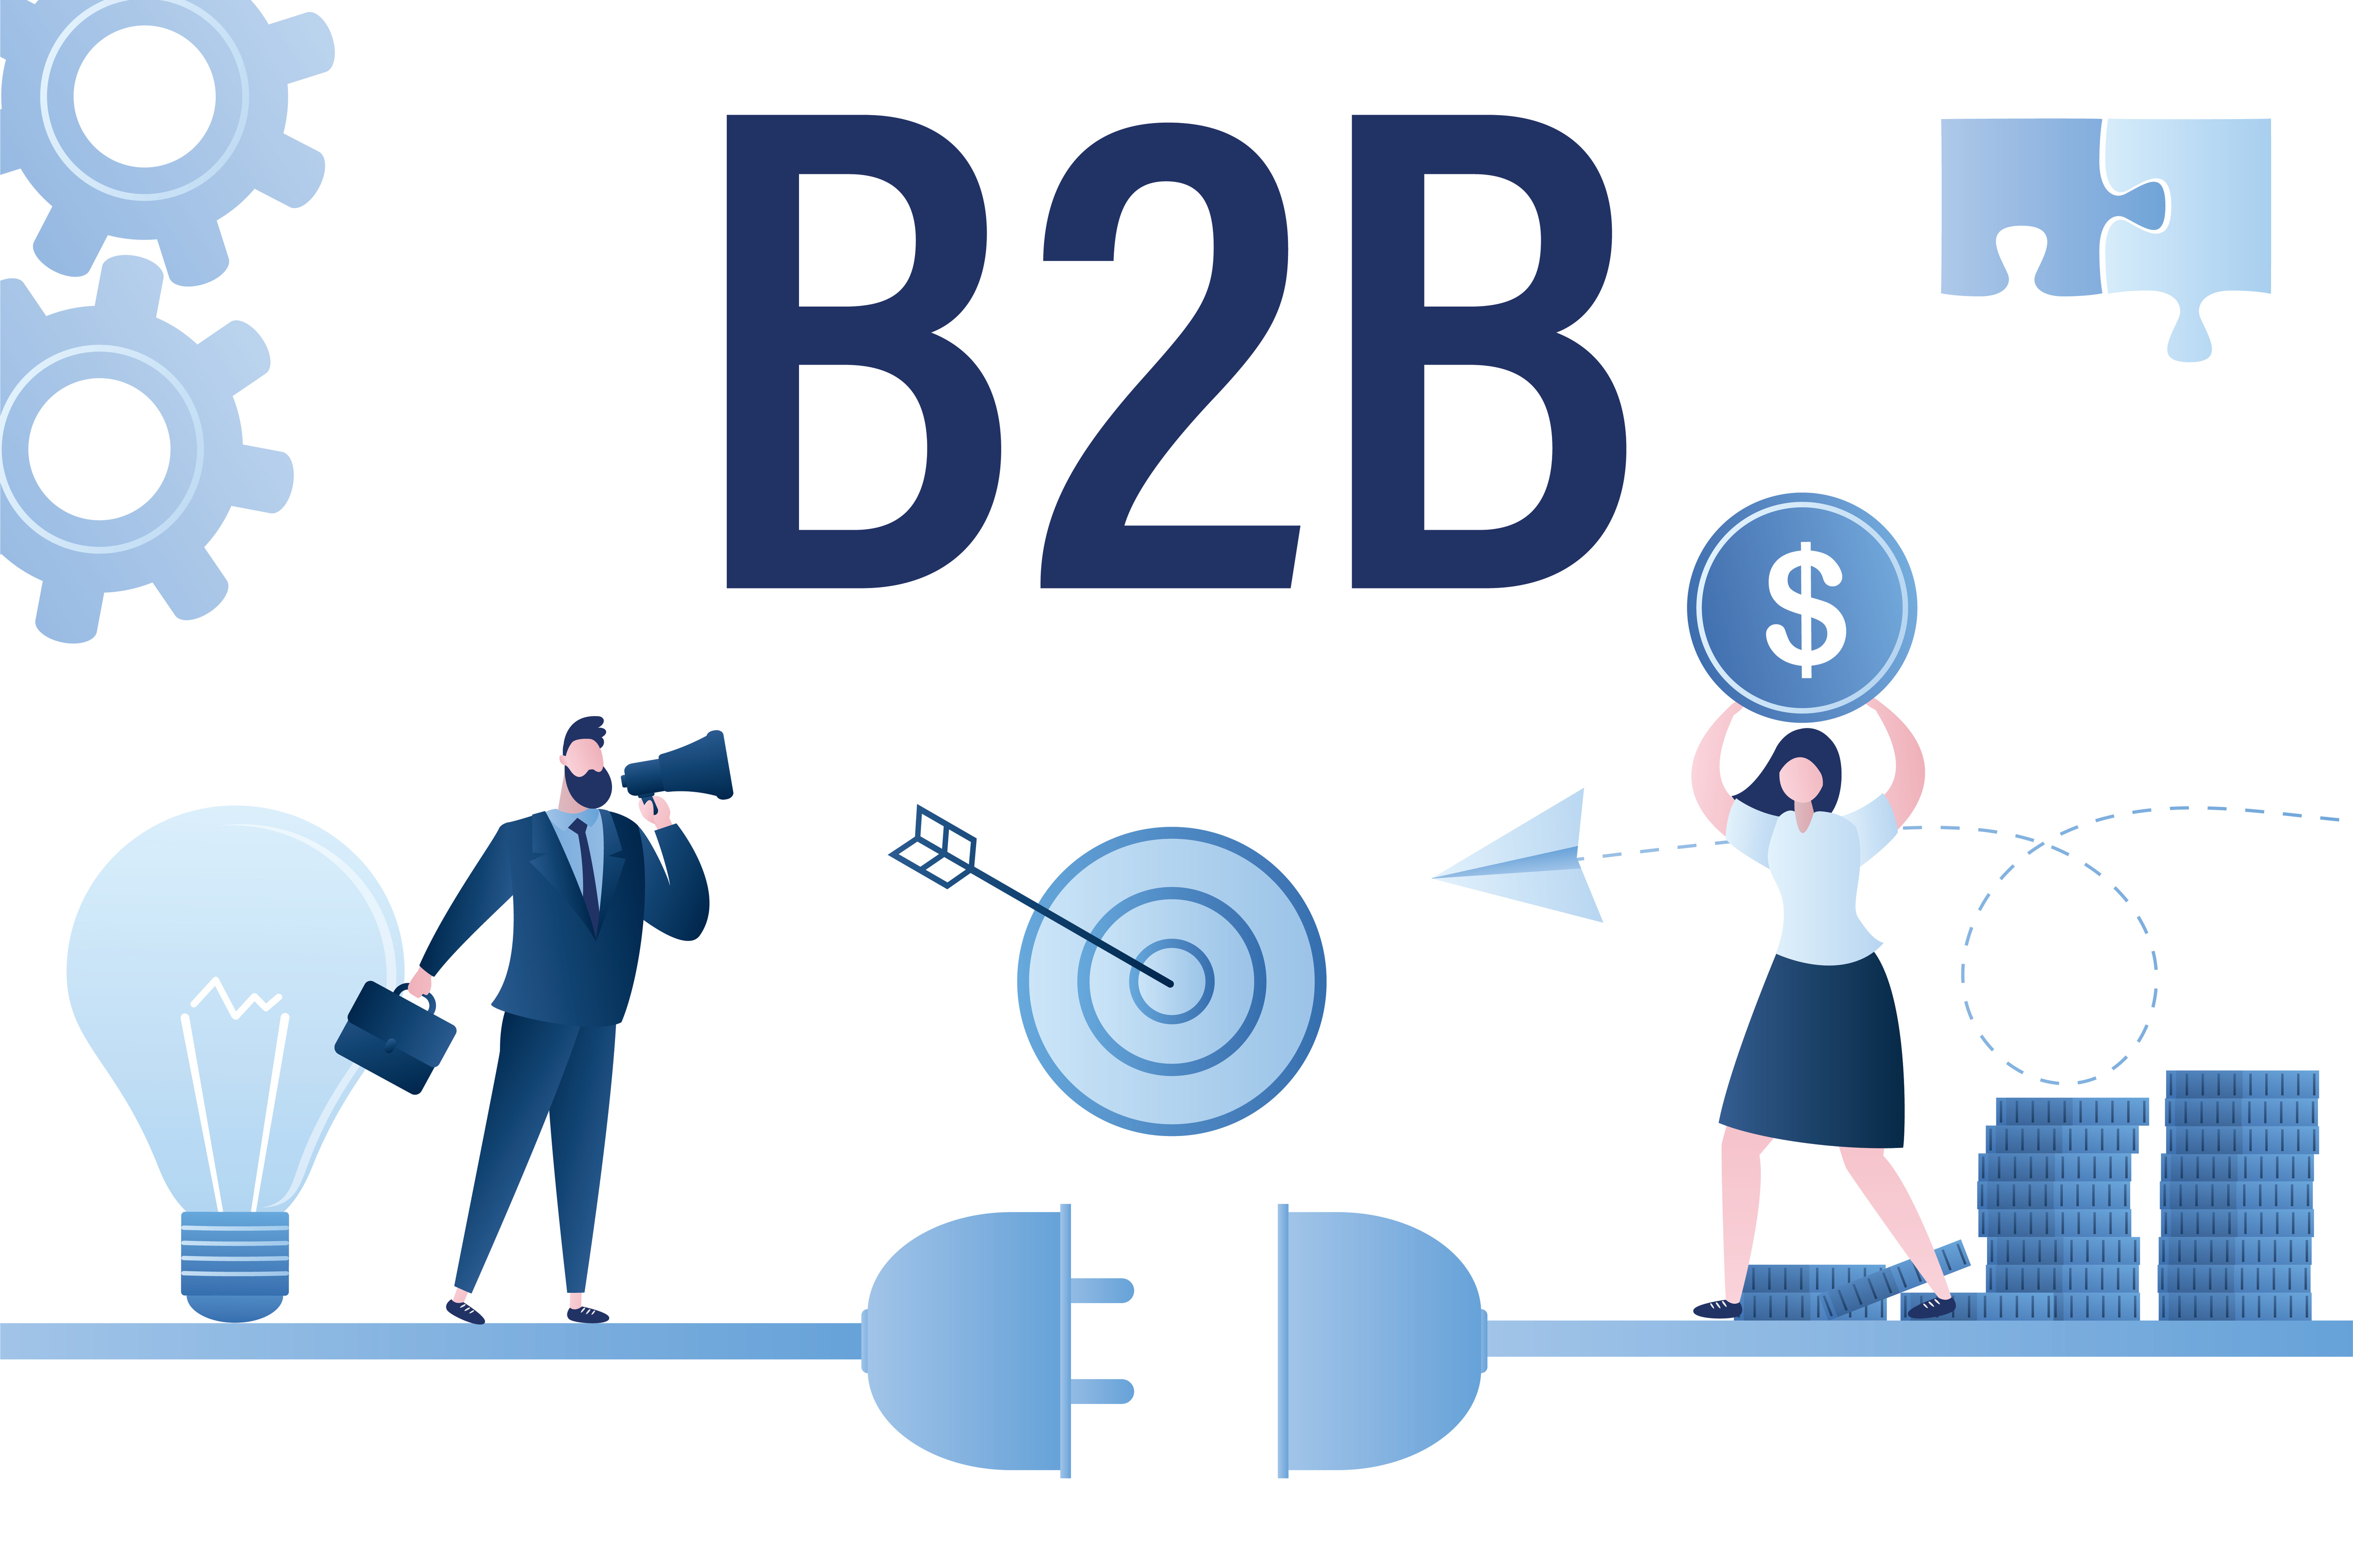  B2b concept - Teamwork, startup and cooperation